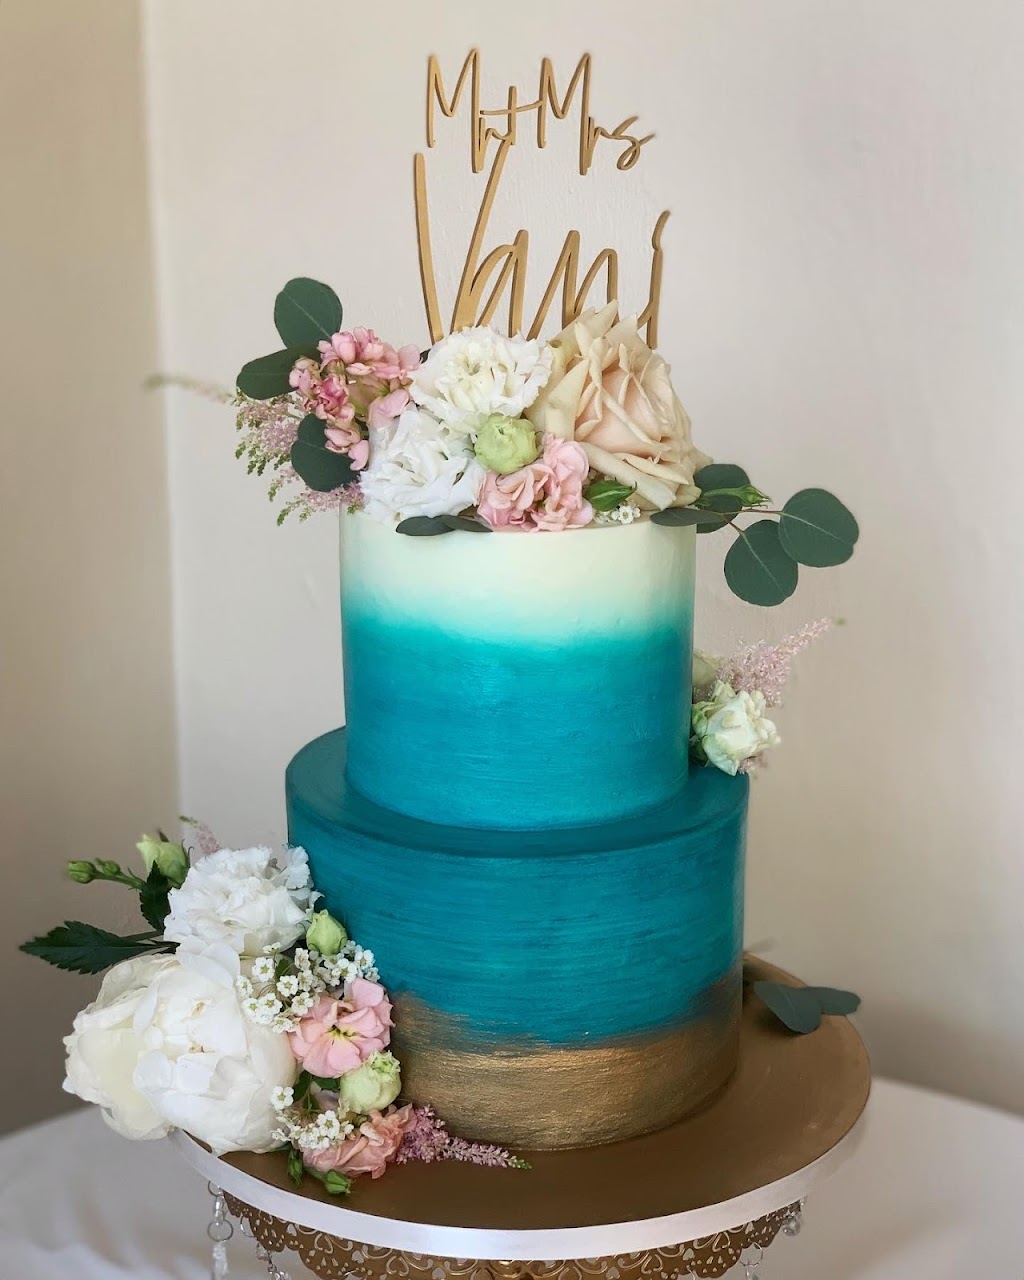 Storeybook Cakes, LLC | Not Open to the Public - Consultations by Appointment Only, 83 Prokop Rd Building 2 - Suite 3, Oxford, CT 06478 | Phone: (203) 560-4749